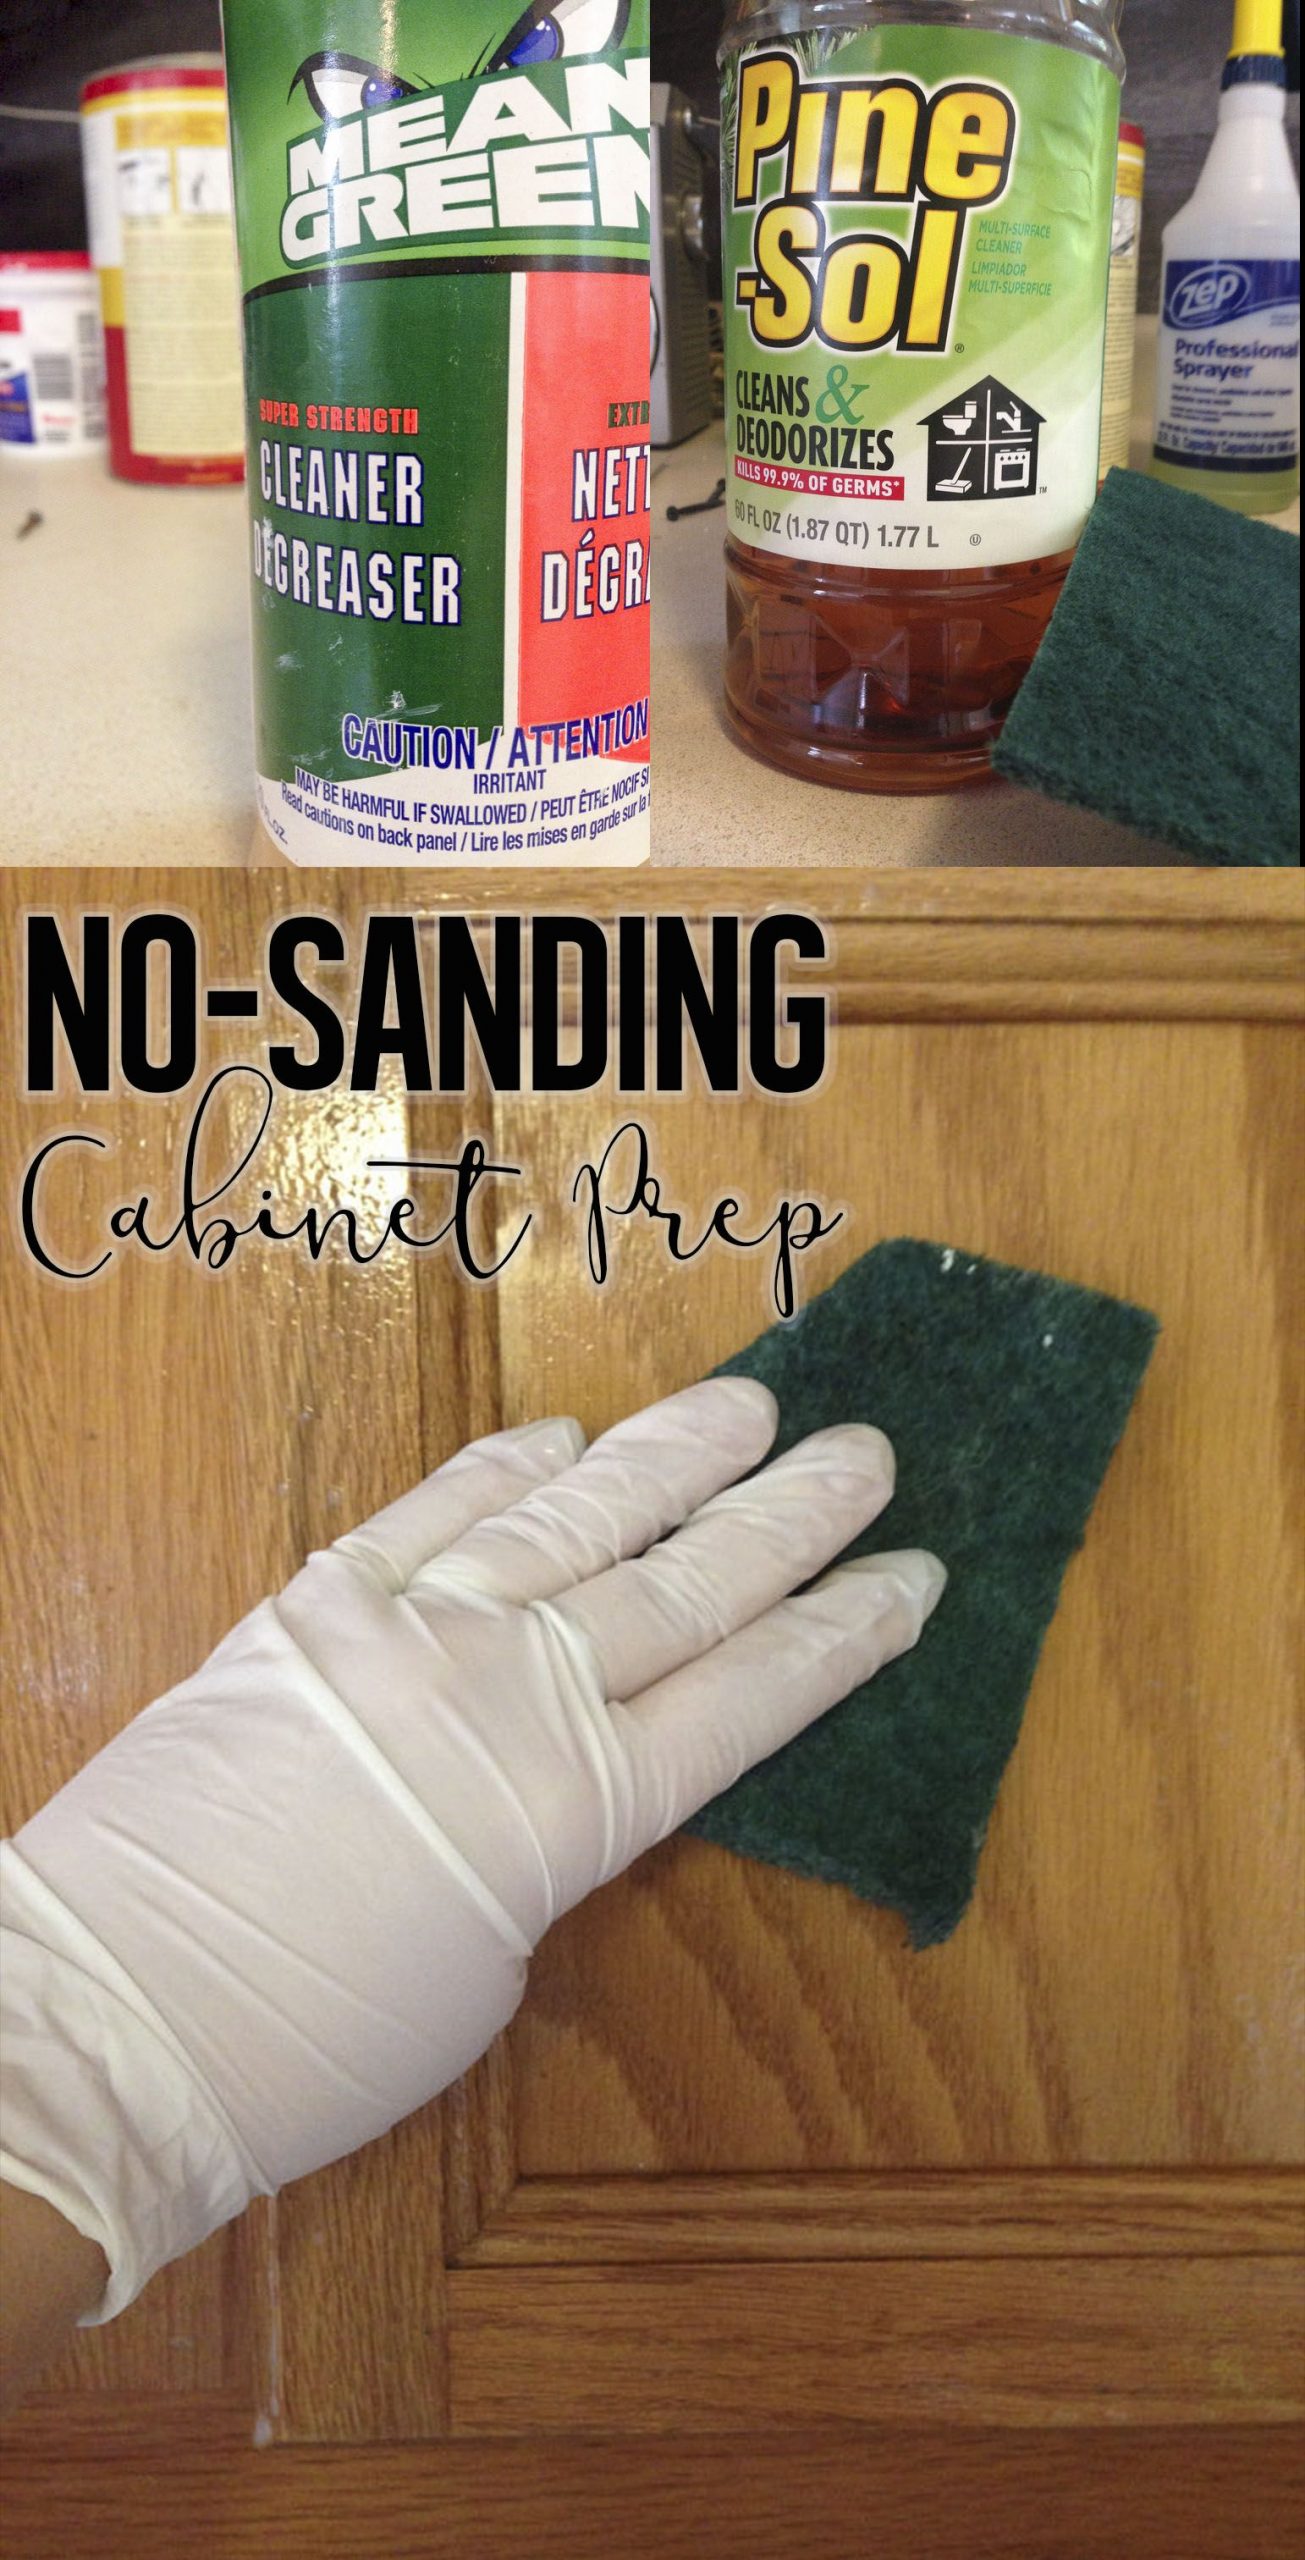 How To Paint Cabinets Without Sanding